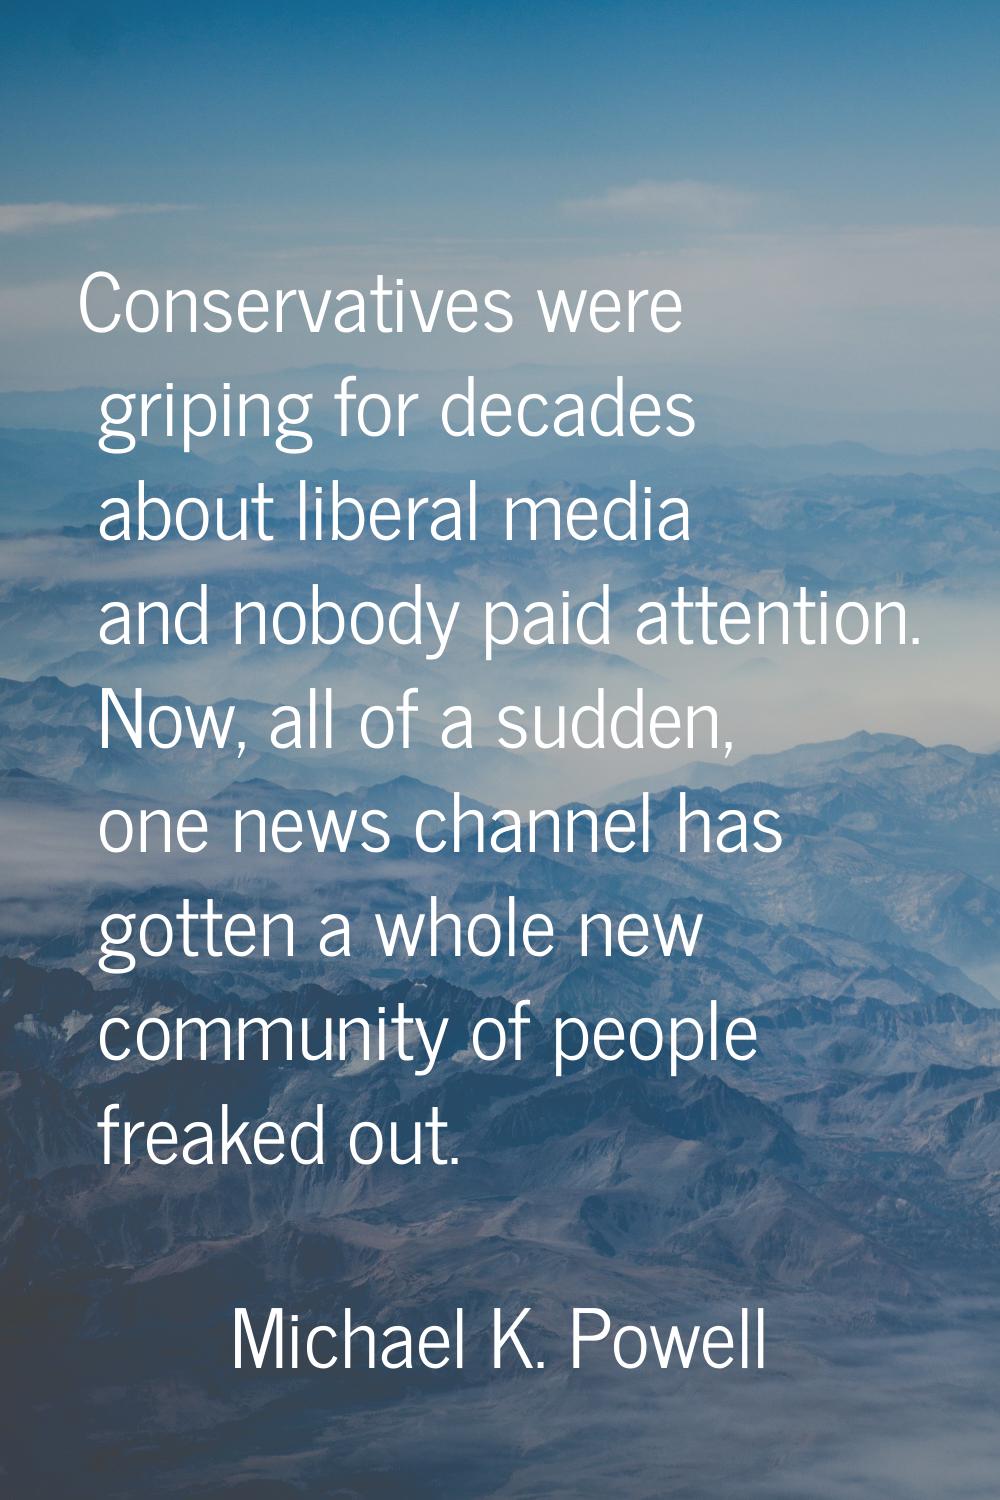 Conservatives were griping for decades about liberal media and nobody paid attention. Now, all of a